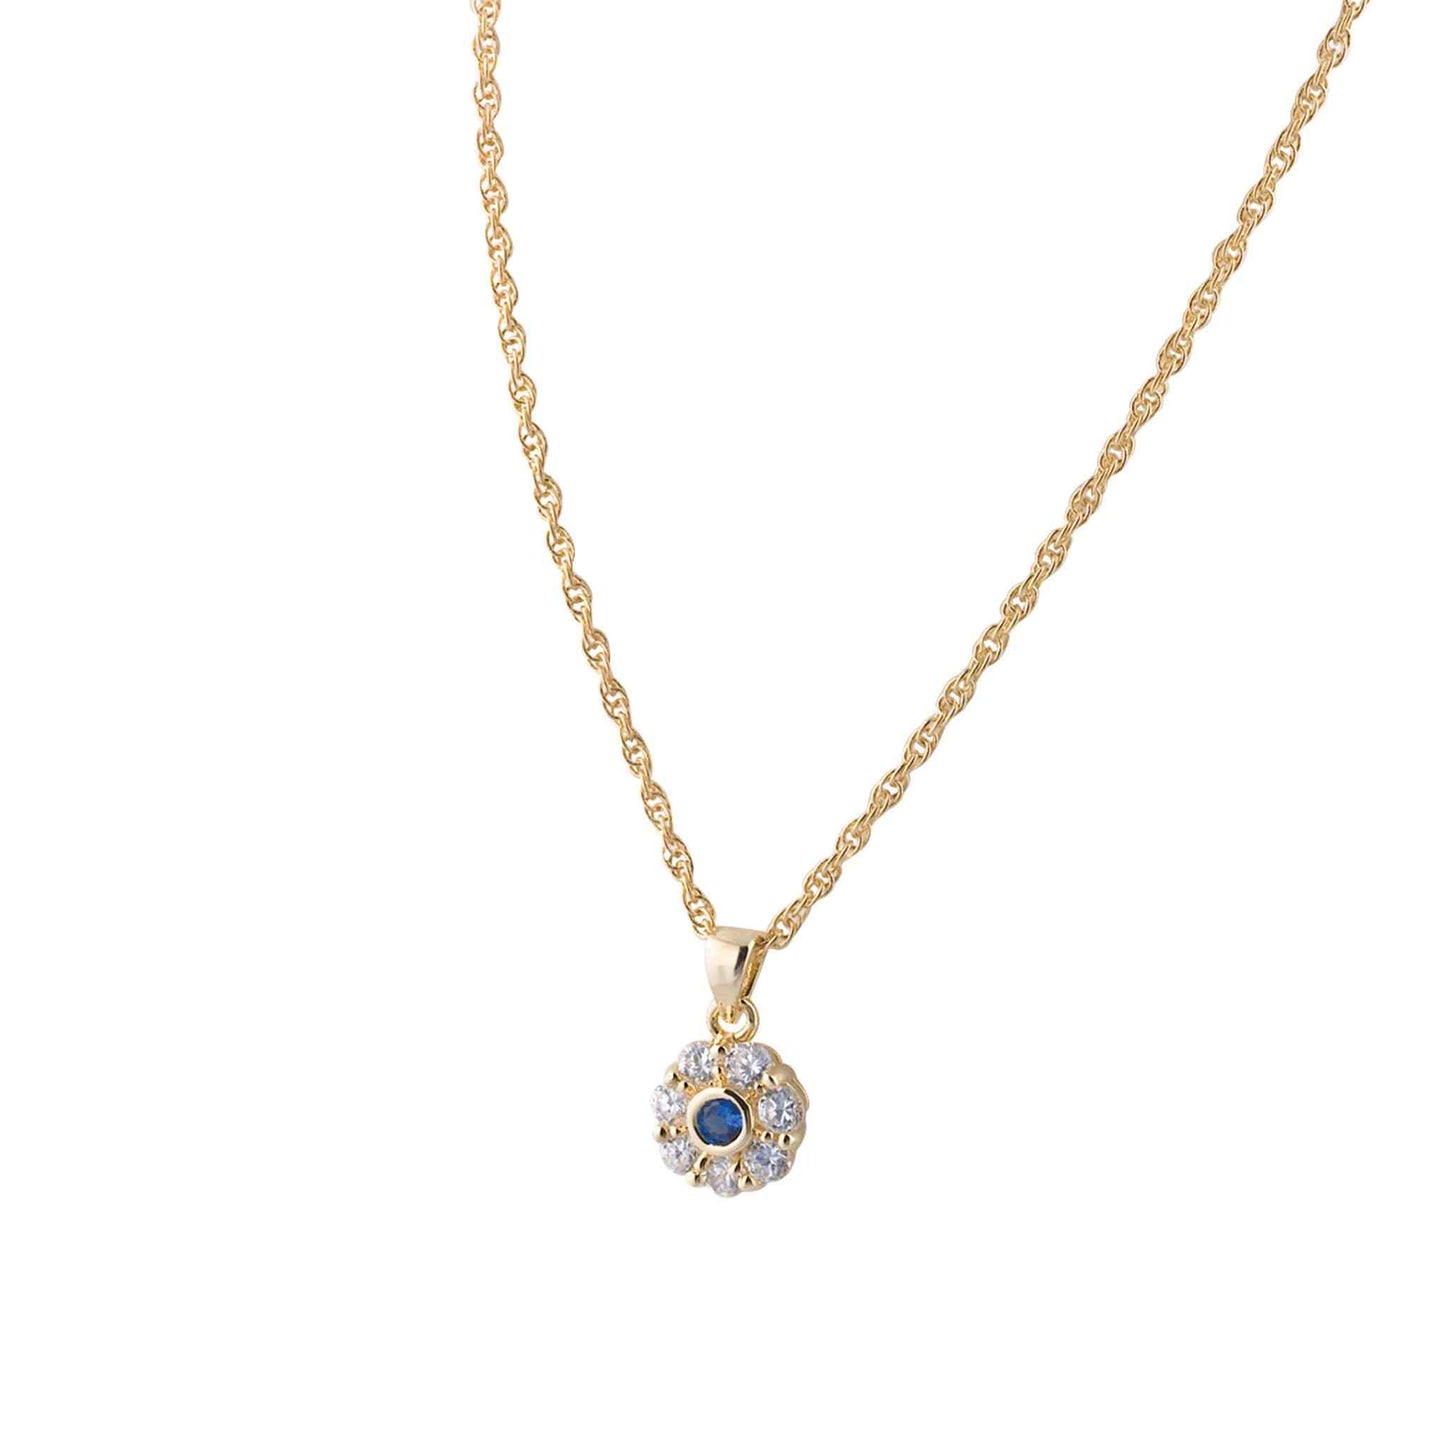 A gemstone simulated diamond flower necklace displayed on a neutral white background.